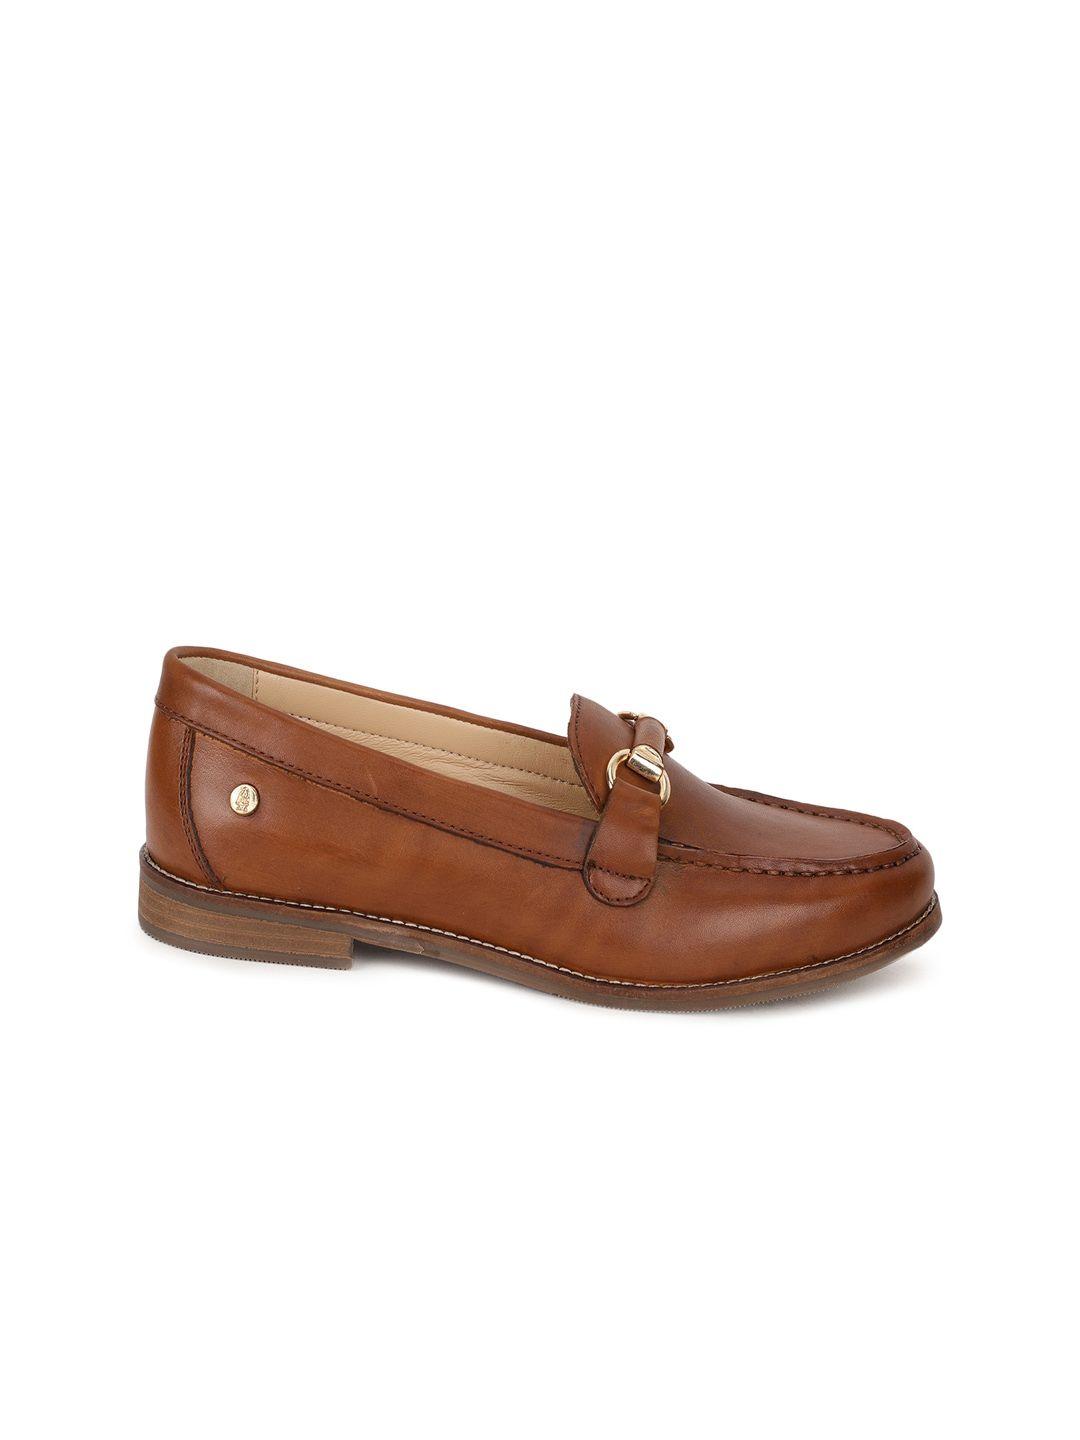 hush-puppies-women-tan-leather-loafers